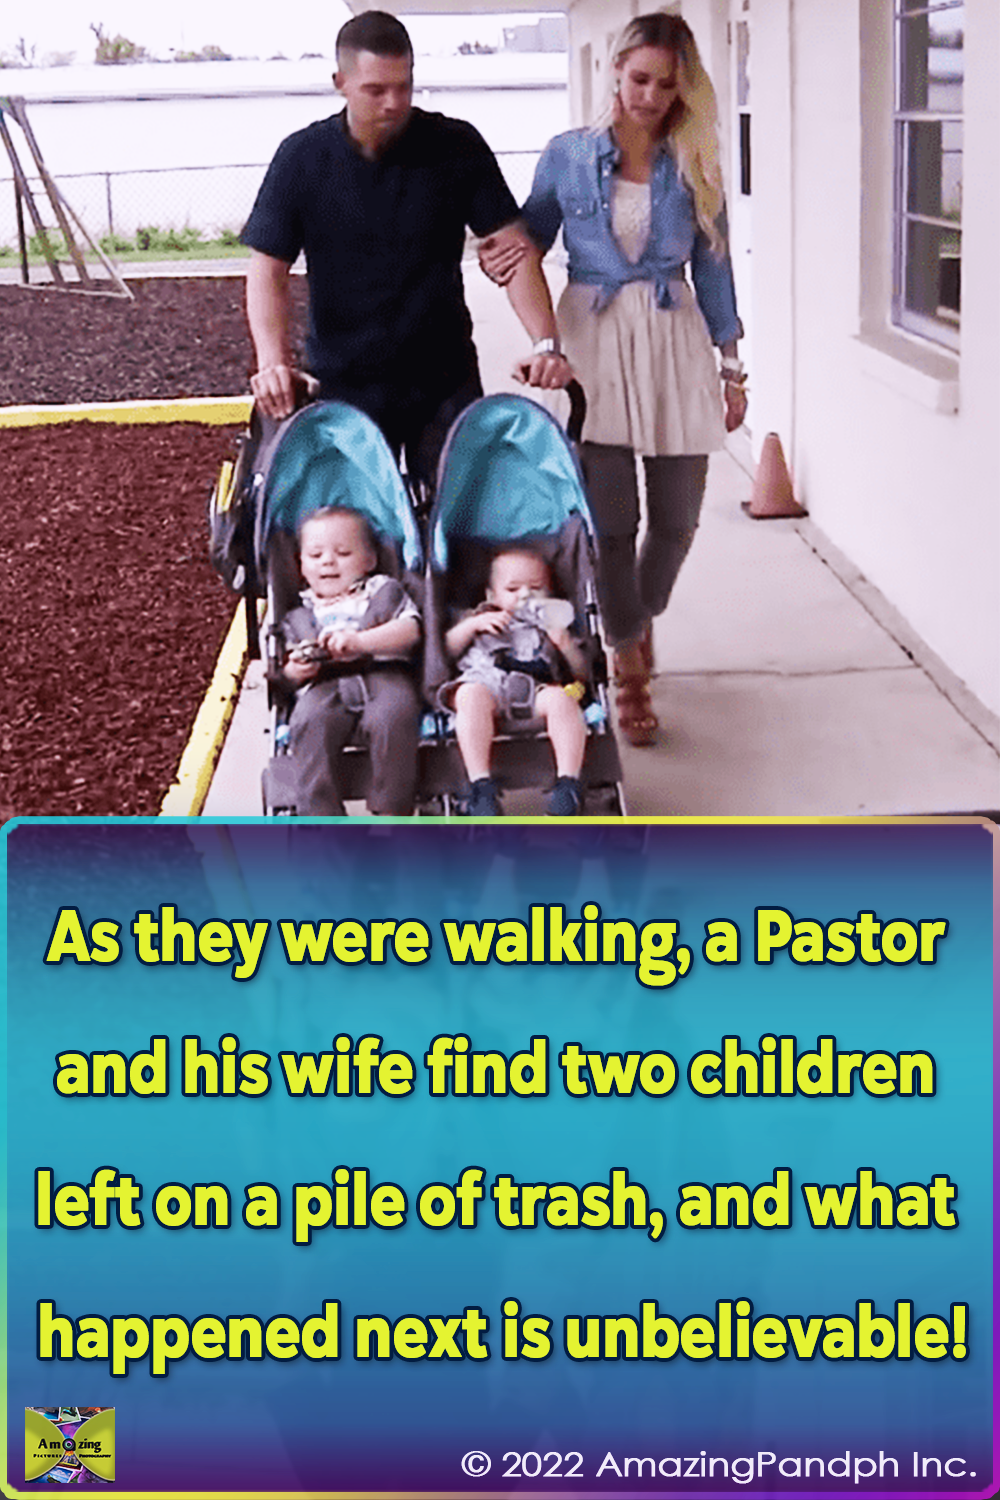 homeless, adpotion, babies, pastor, family, abandoned, new life, brothers,